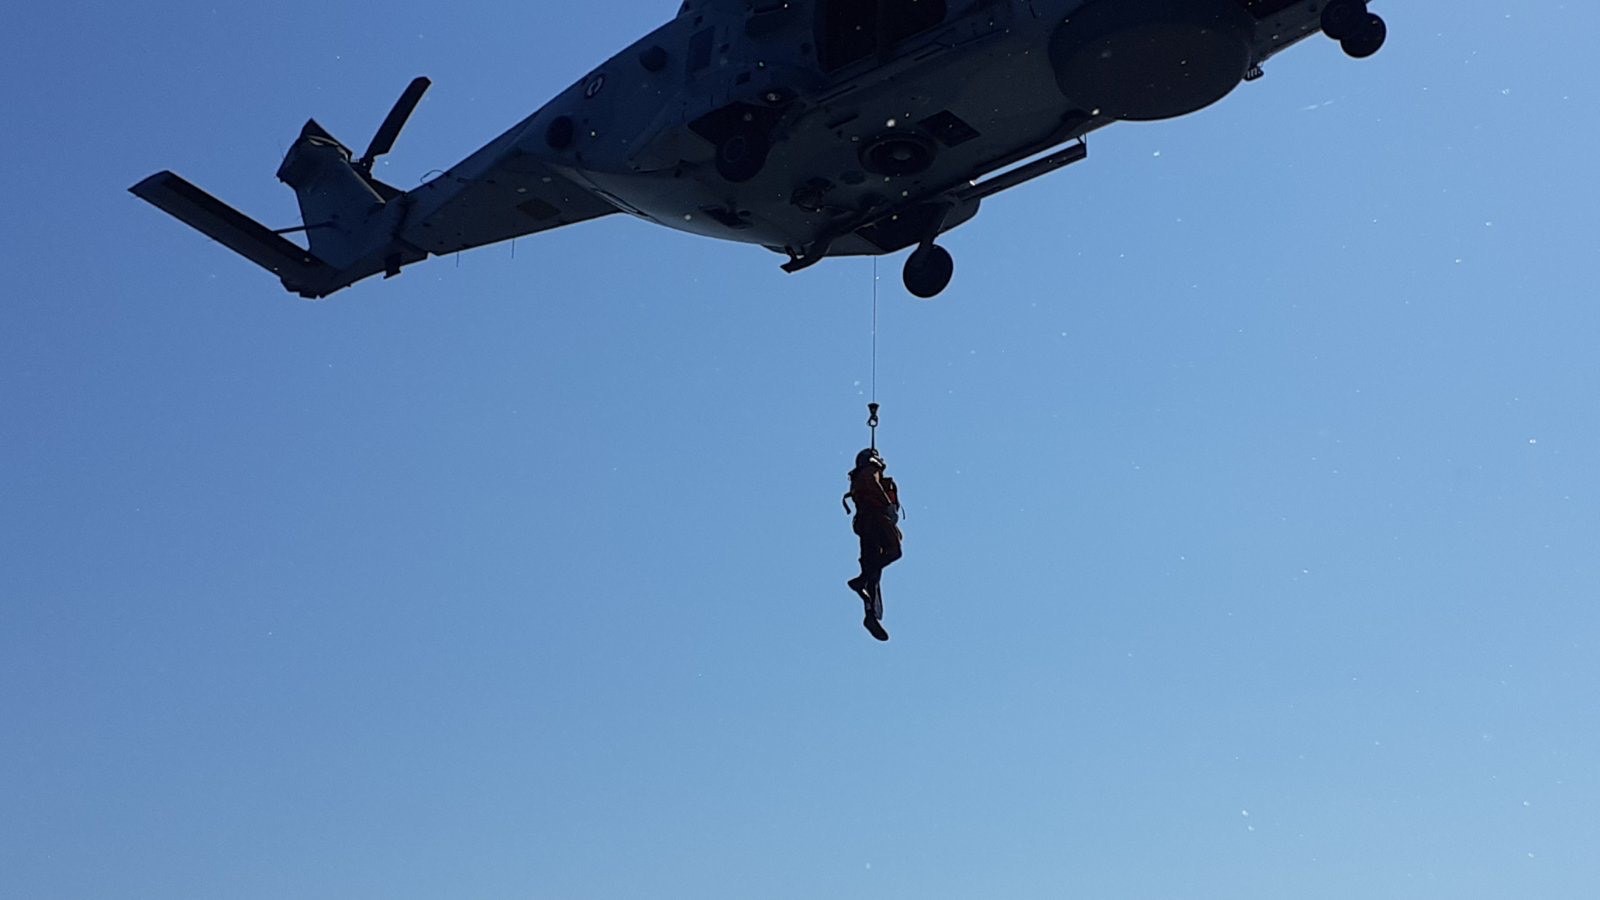 Joint Search and Rescue (SAR) Exercise
SAREX 